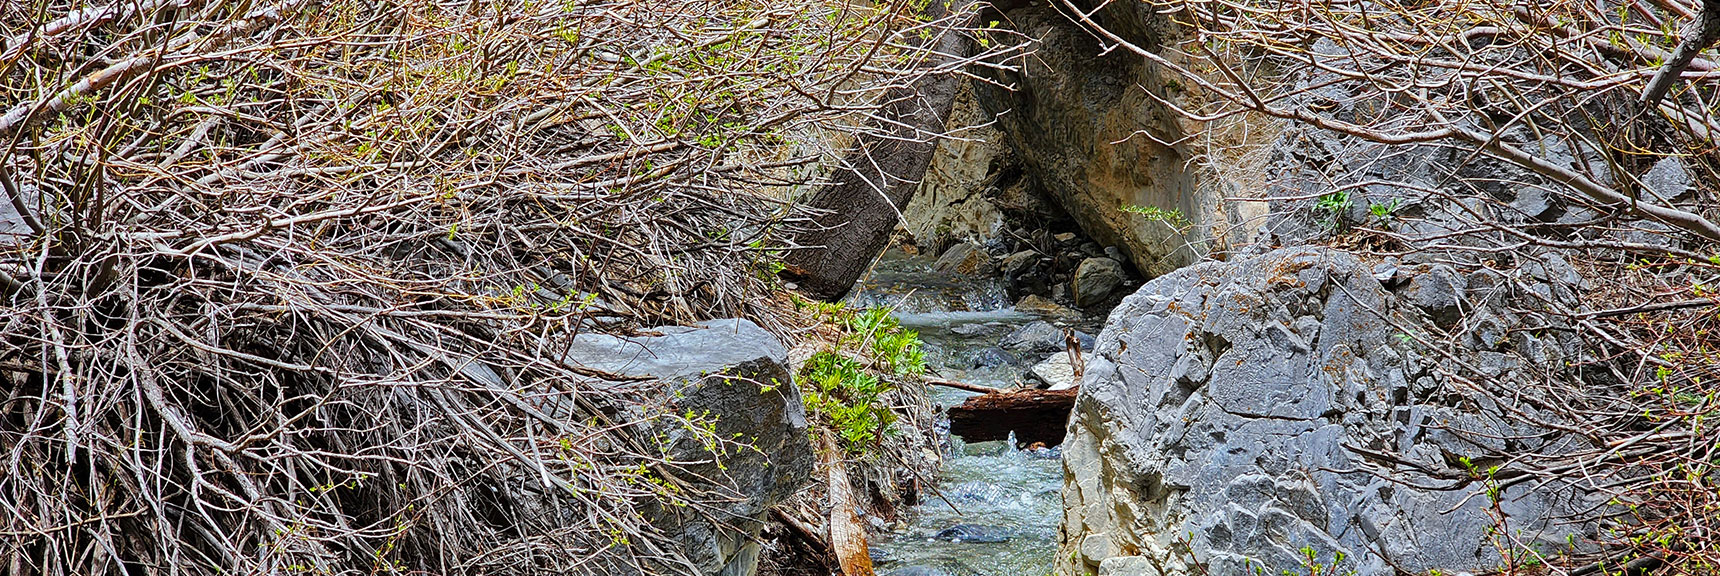 Further Up the Canyon Narrows | Fletcher Canyon Trail | Mt Charleston Wilderness | Spring Mountains, Nevada